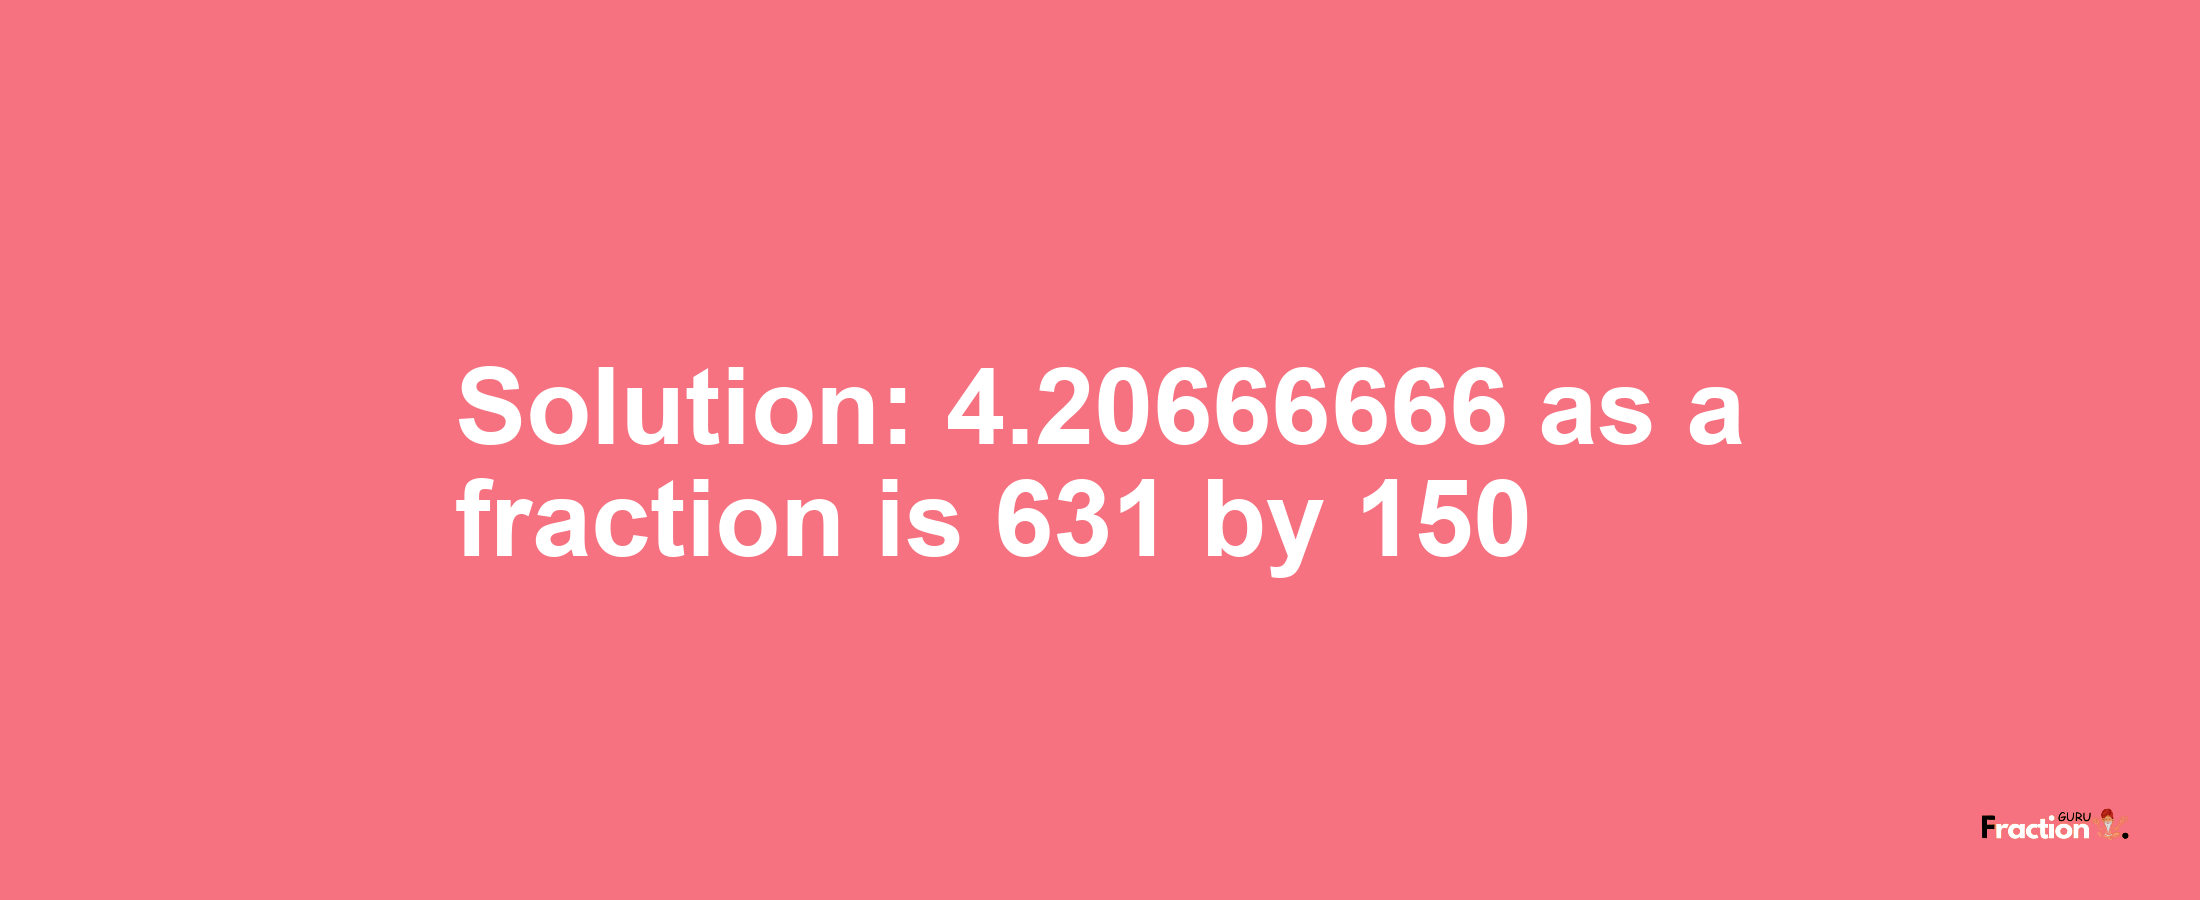 Solution:4.20666666 as a fraction is 631/150